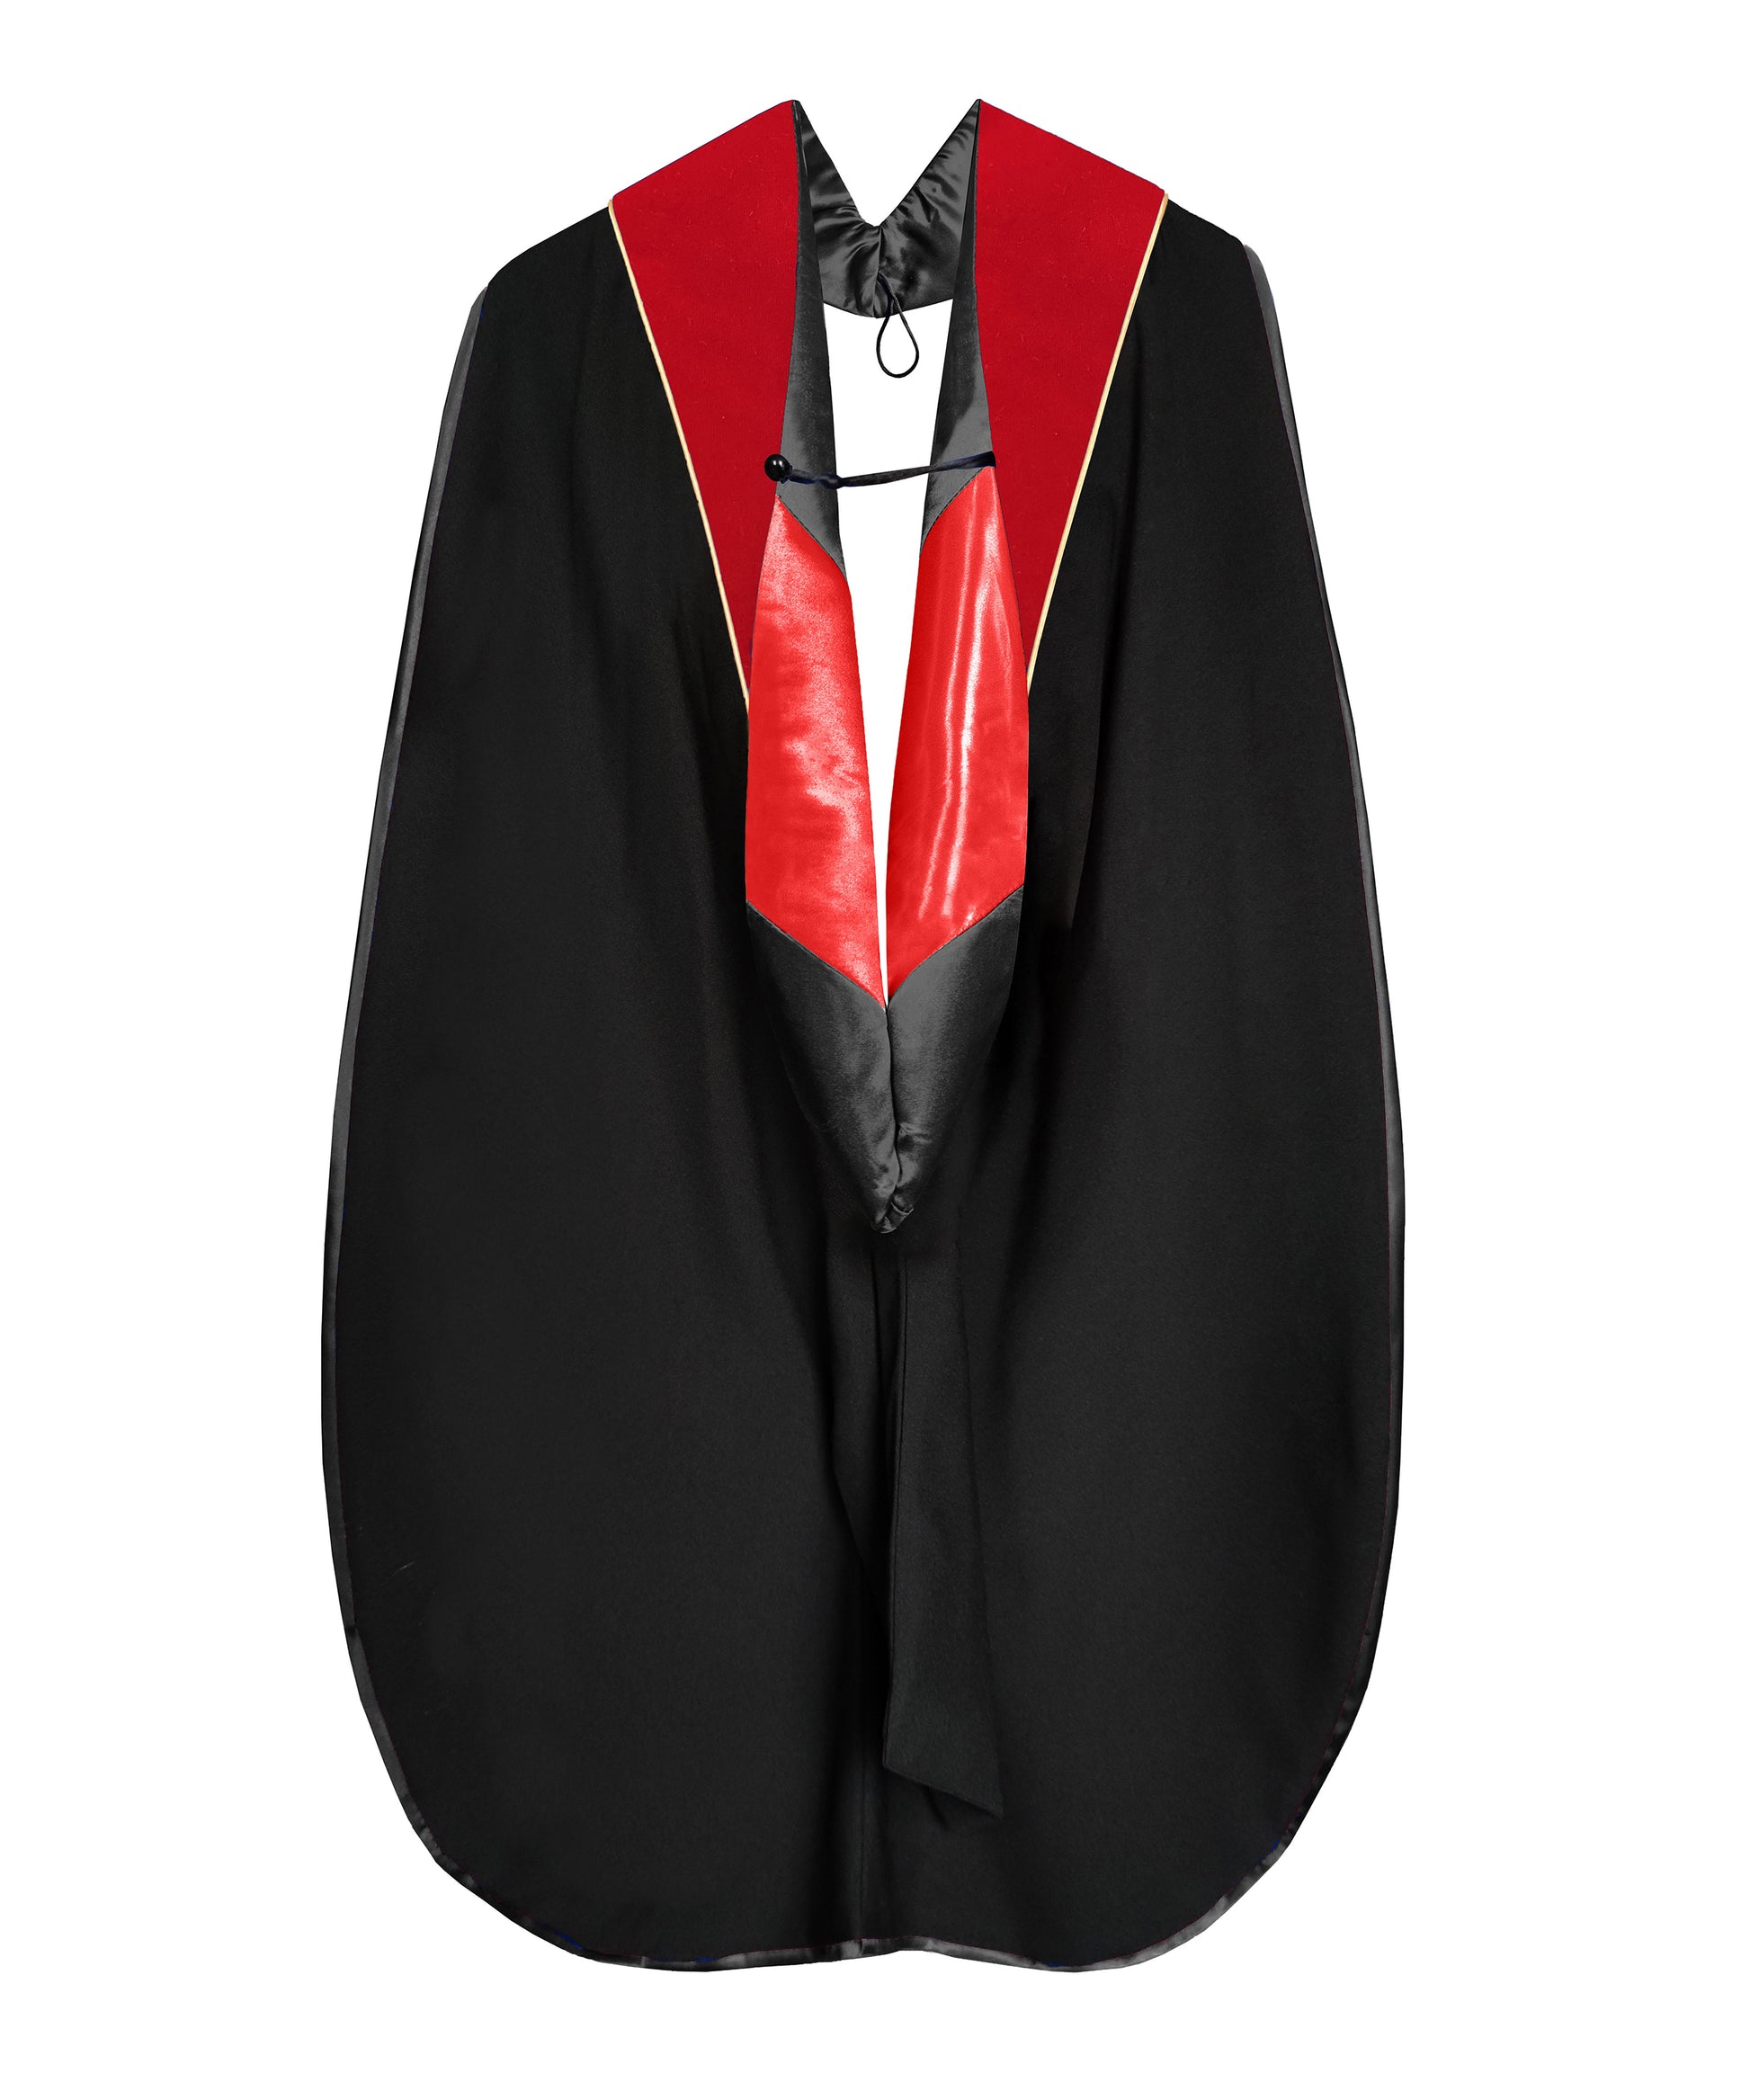 Deluxe Doctoral Graduation Hood for Various Degrees and Schools-CA graduation